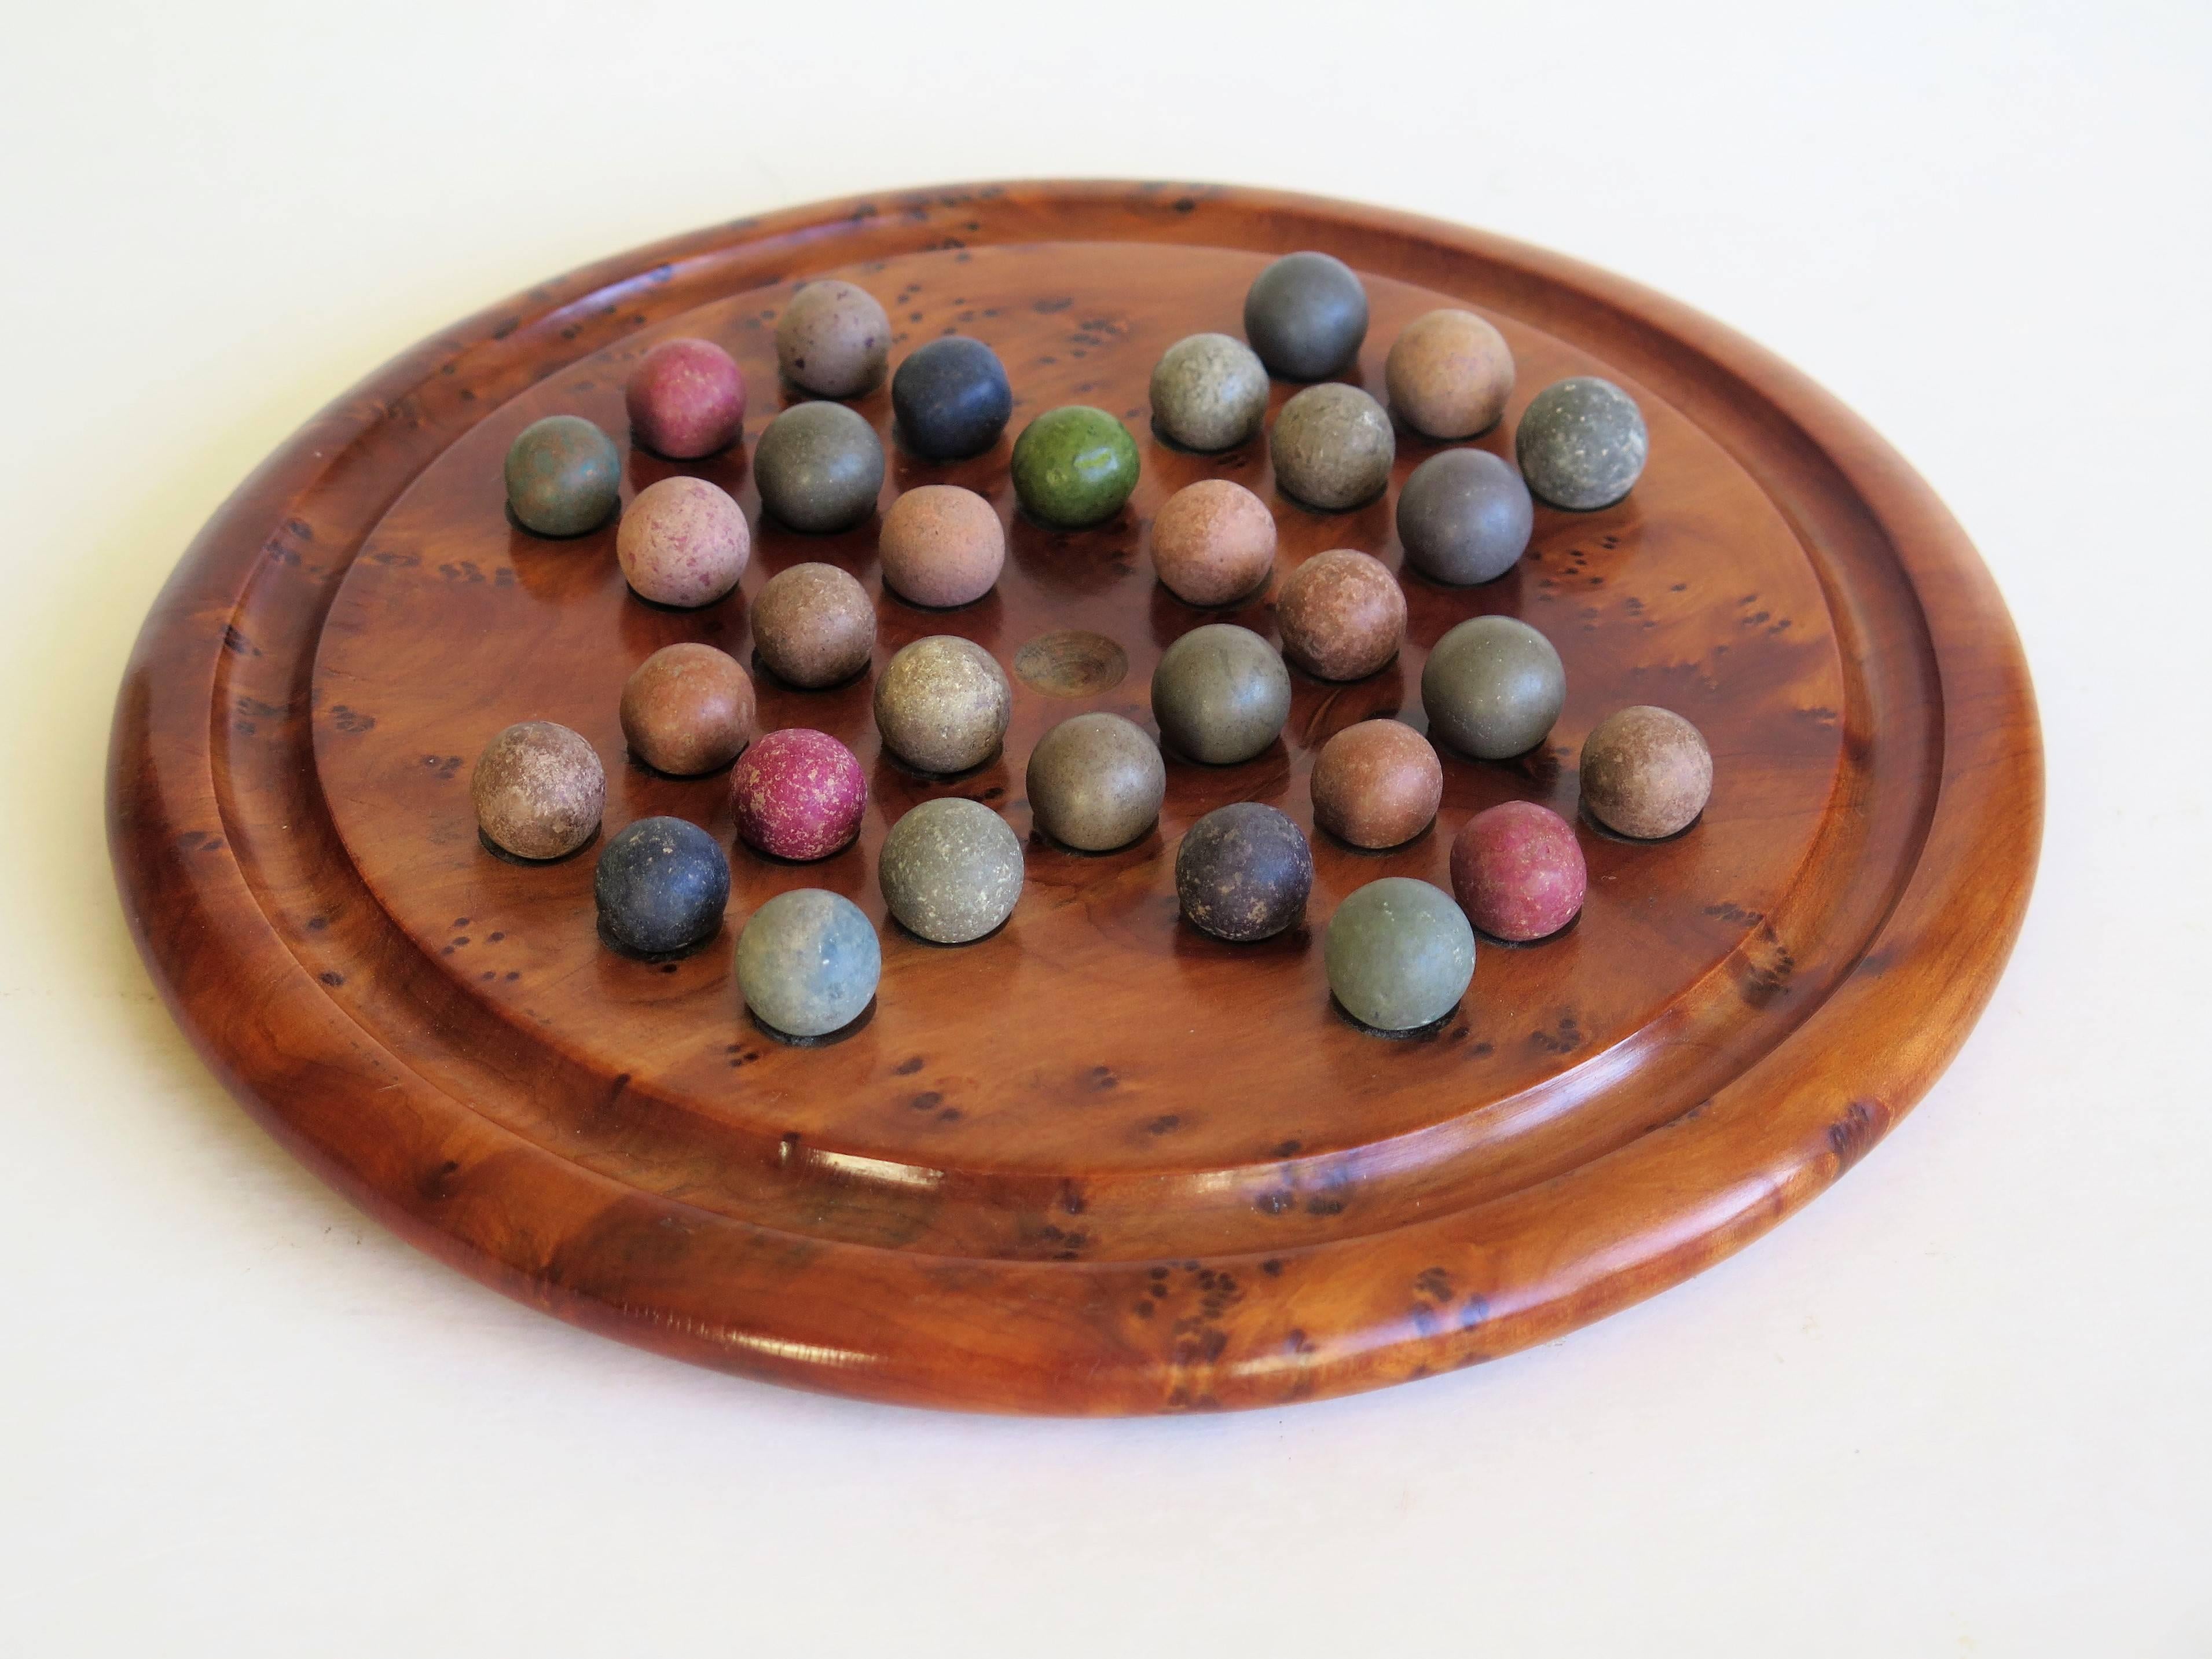 This is a complete Board Game of Marble Solitaire from the late 19th century. 

The circular turned board is very attractive being made of a burr wood, possibly Maple, with a gallery to the outer perimeter. The board has 32 equi-spaced holes with an